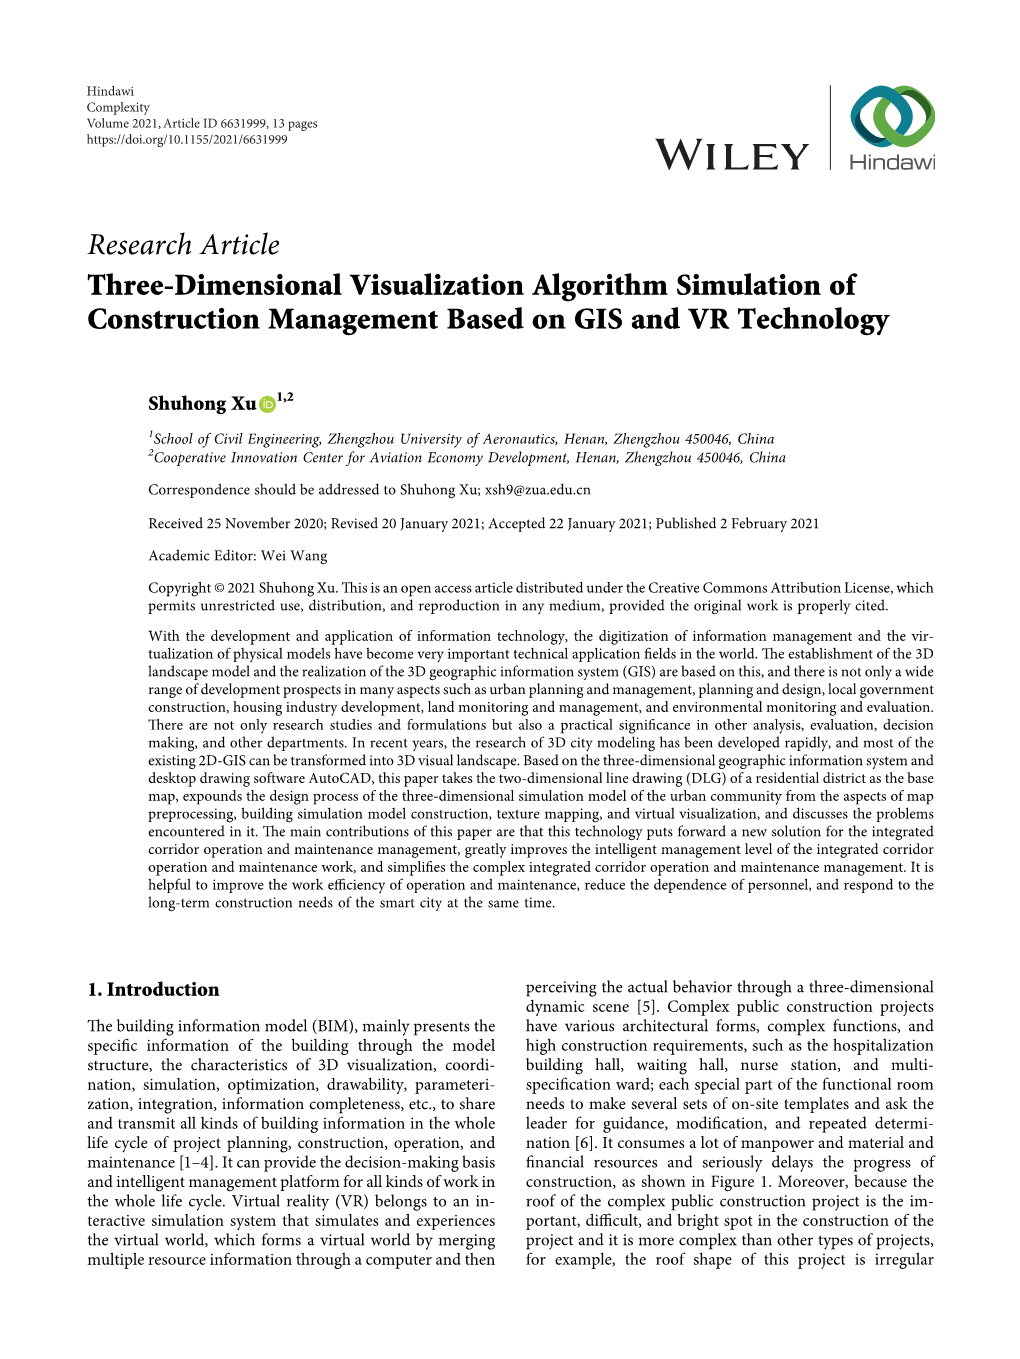 Three-Dimensional Visualization Algorithm Simulation of Construction Management Based on GIS and VR Technology